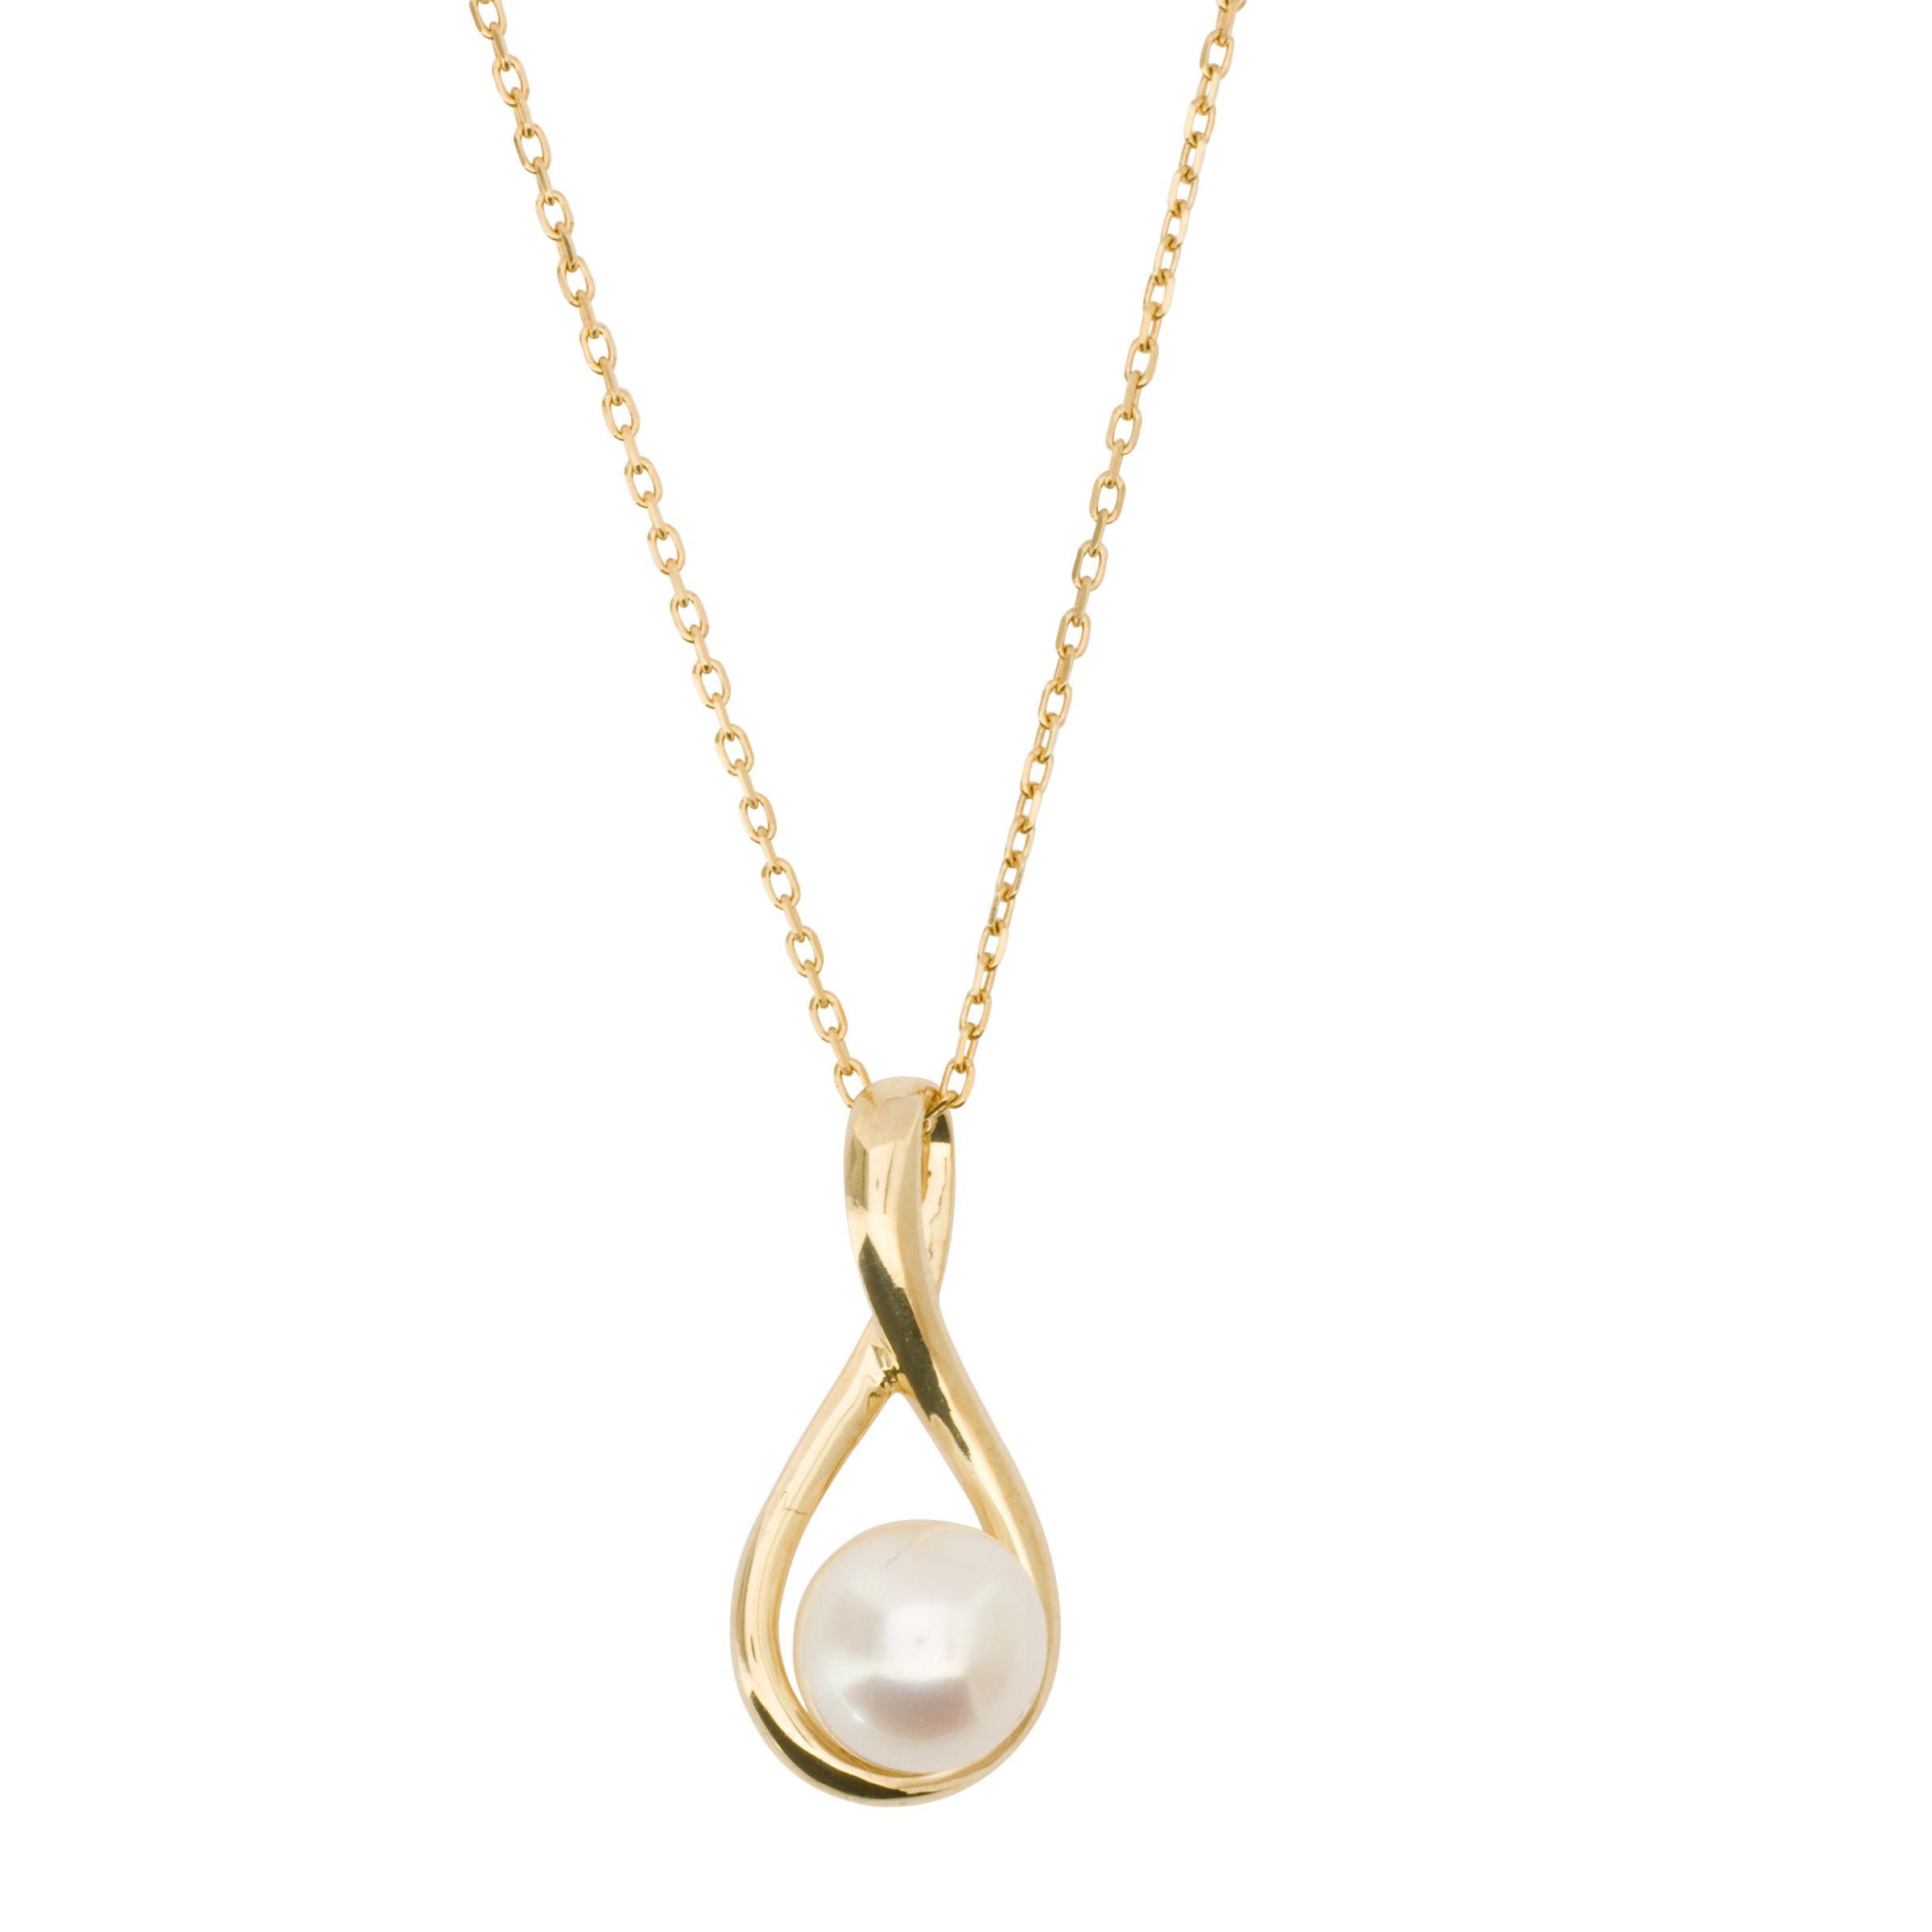 London Road Gold Pearl Pendant Necklace 57998